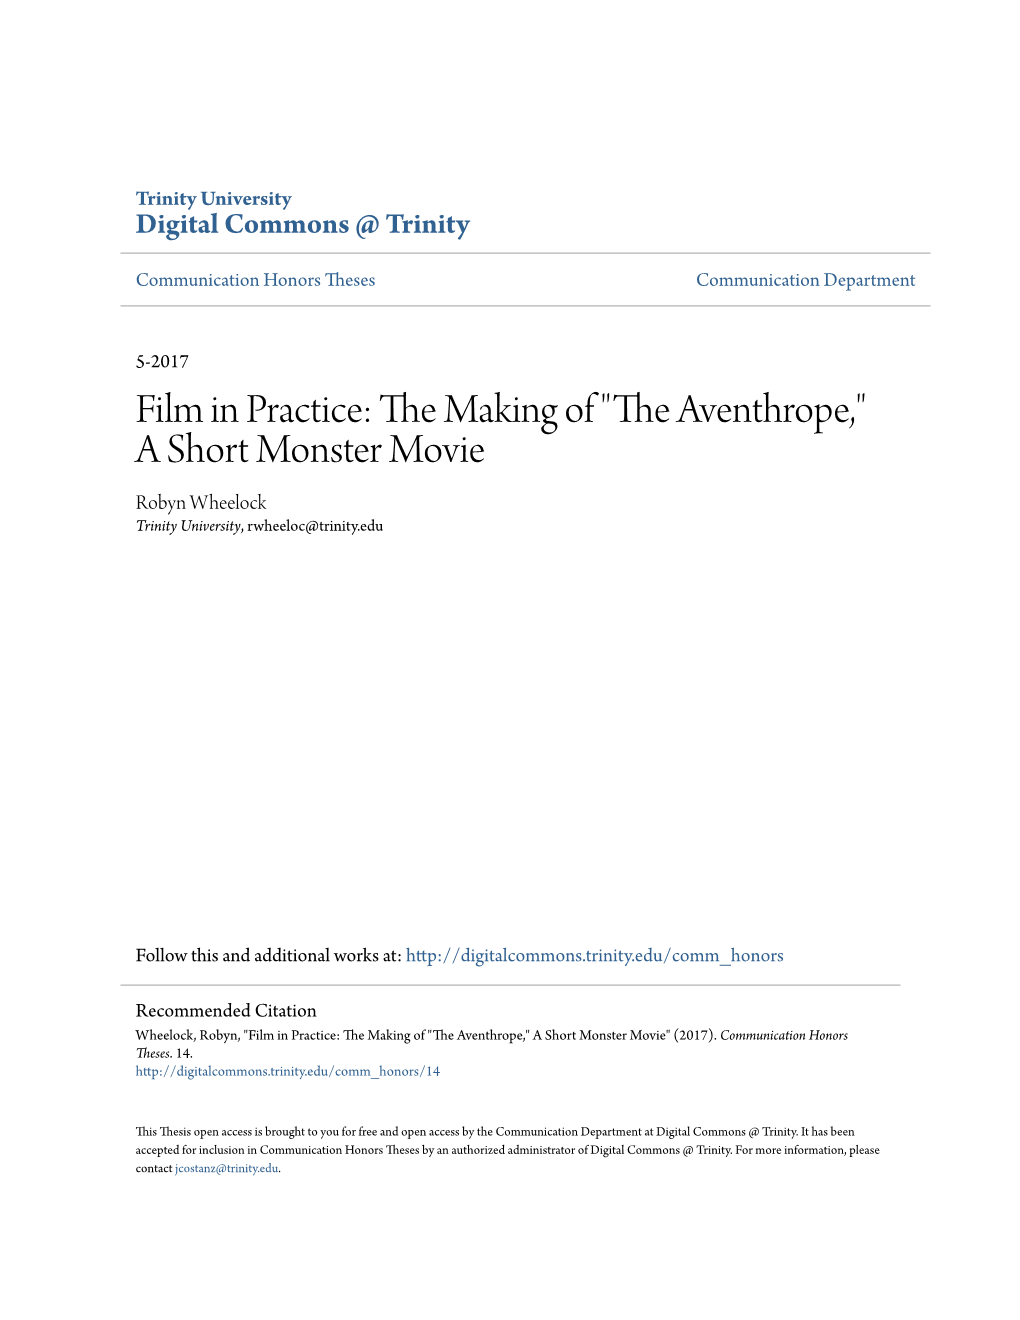 Film in Practice: the Making of "The Aventhrope," a Short Monster Movie